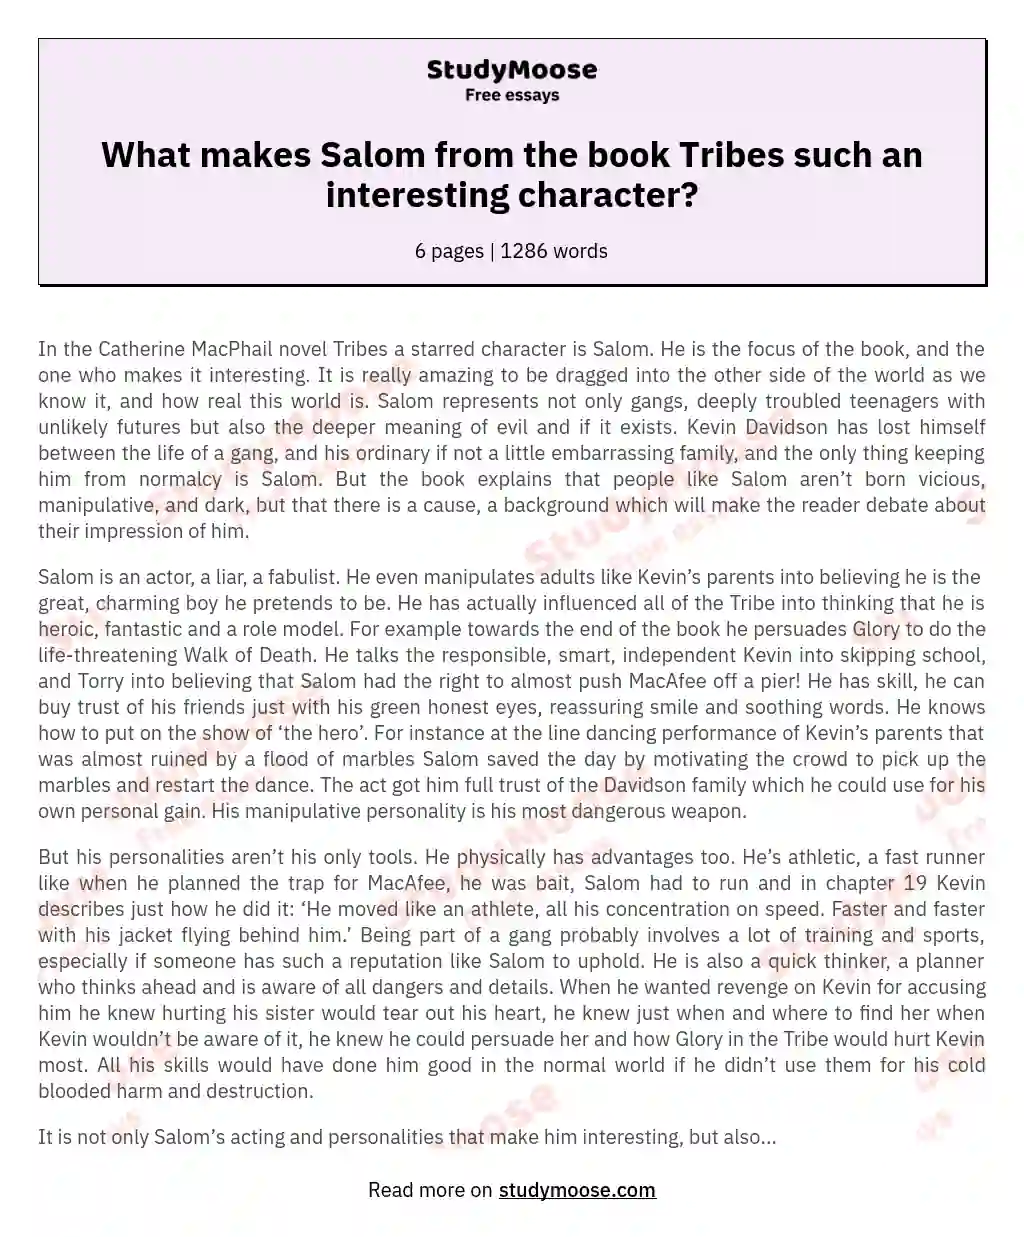 What makes Salom from the book Tribes such an interesting character?